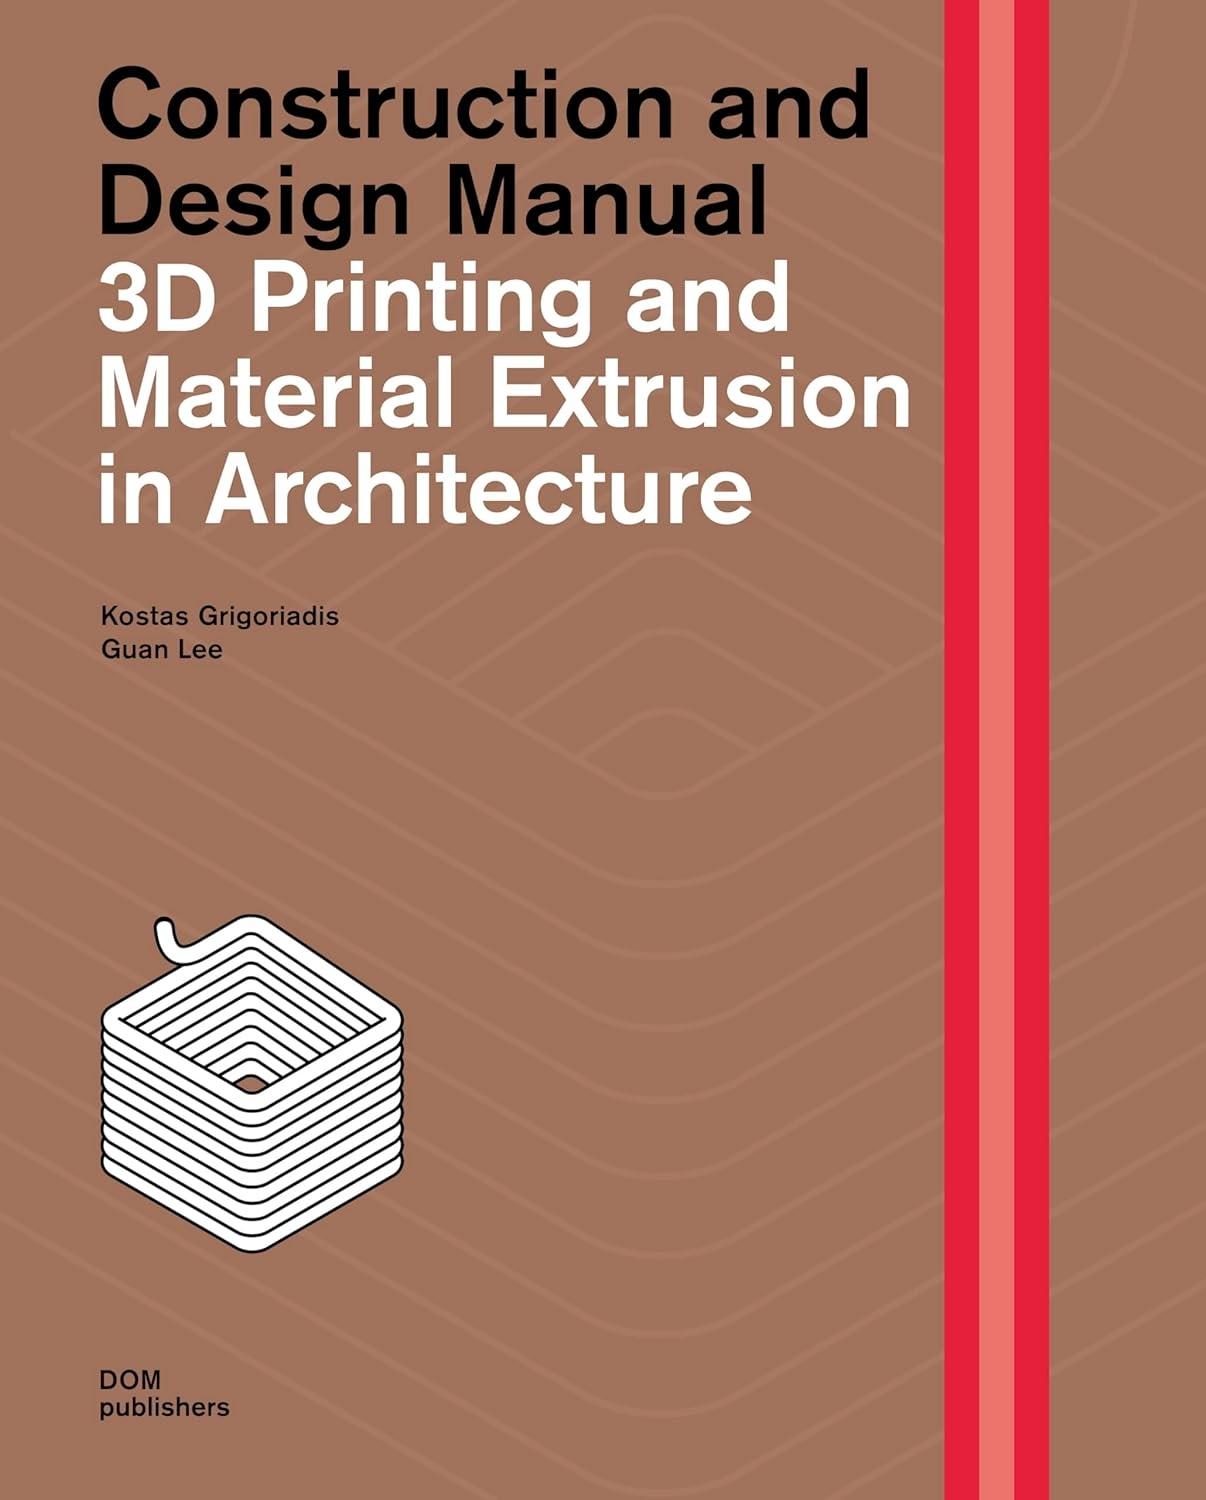 3D PRINTING AND MATERIAL EXTRUSION IN ARCHITECTURE